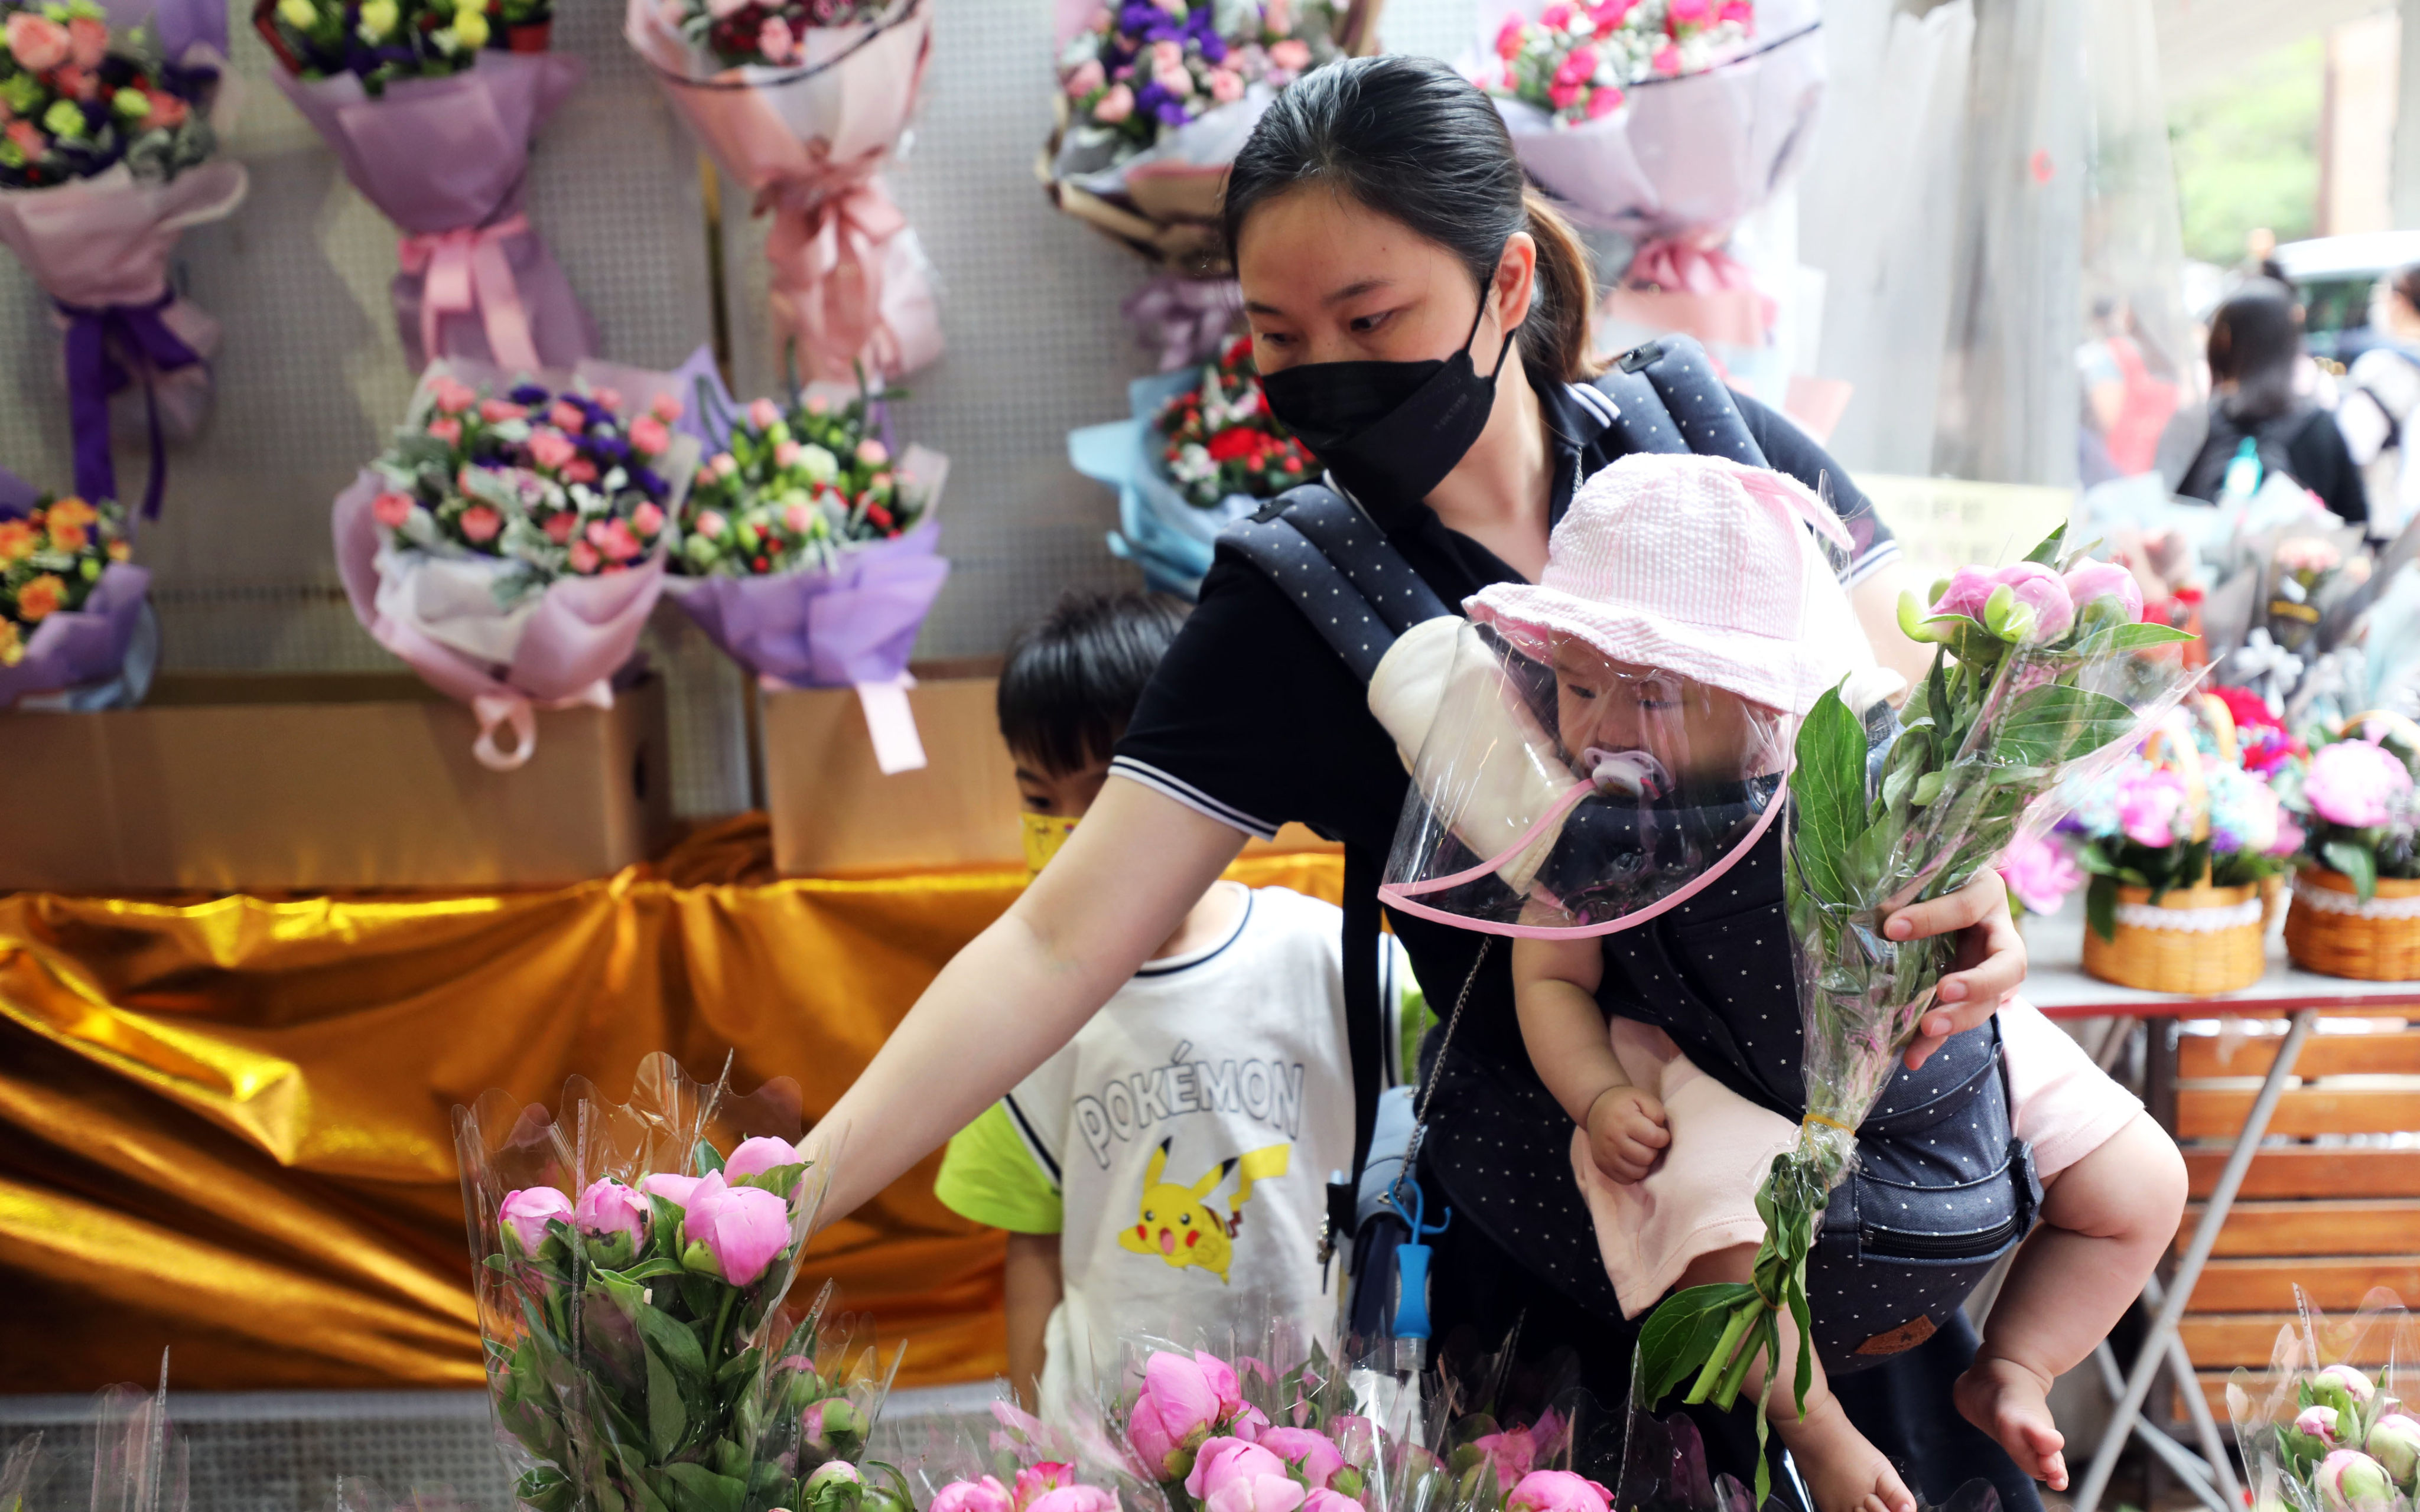 Mong Kok’s flower market was buzzing with Hongkongers on Mother’s Day. Photo: Xiaomei Chen